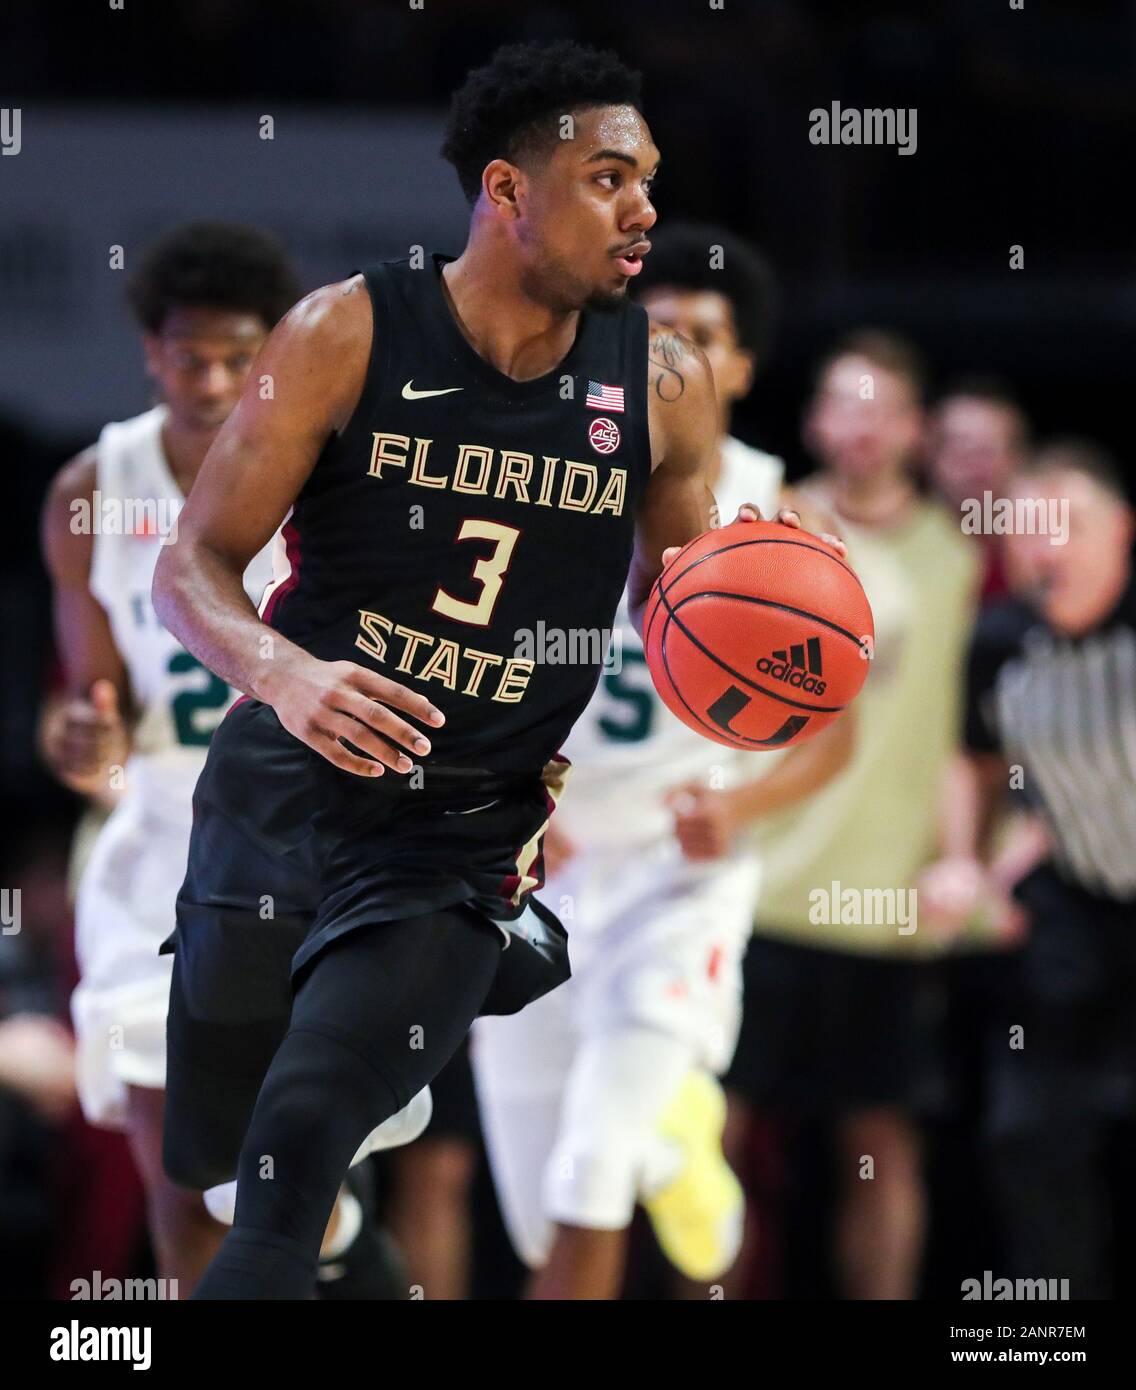 January 18, 2020: Florida State Seminoles guard Trent Forrest (3) moves the ball during an NCAA men's basketball game against the Miami Hurricanes at the Watsco Center in Coral Gables, Florida. Florida State won 83-79 in overtime. Mario Houben/CSM Stock Photo